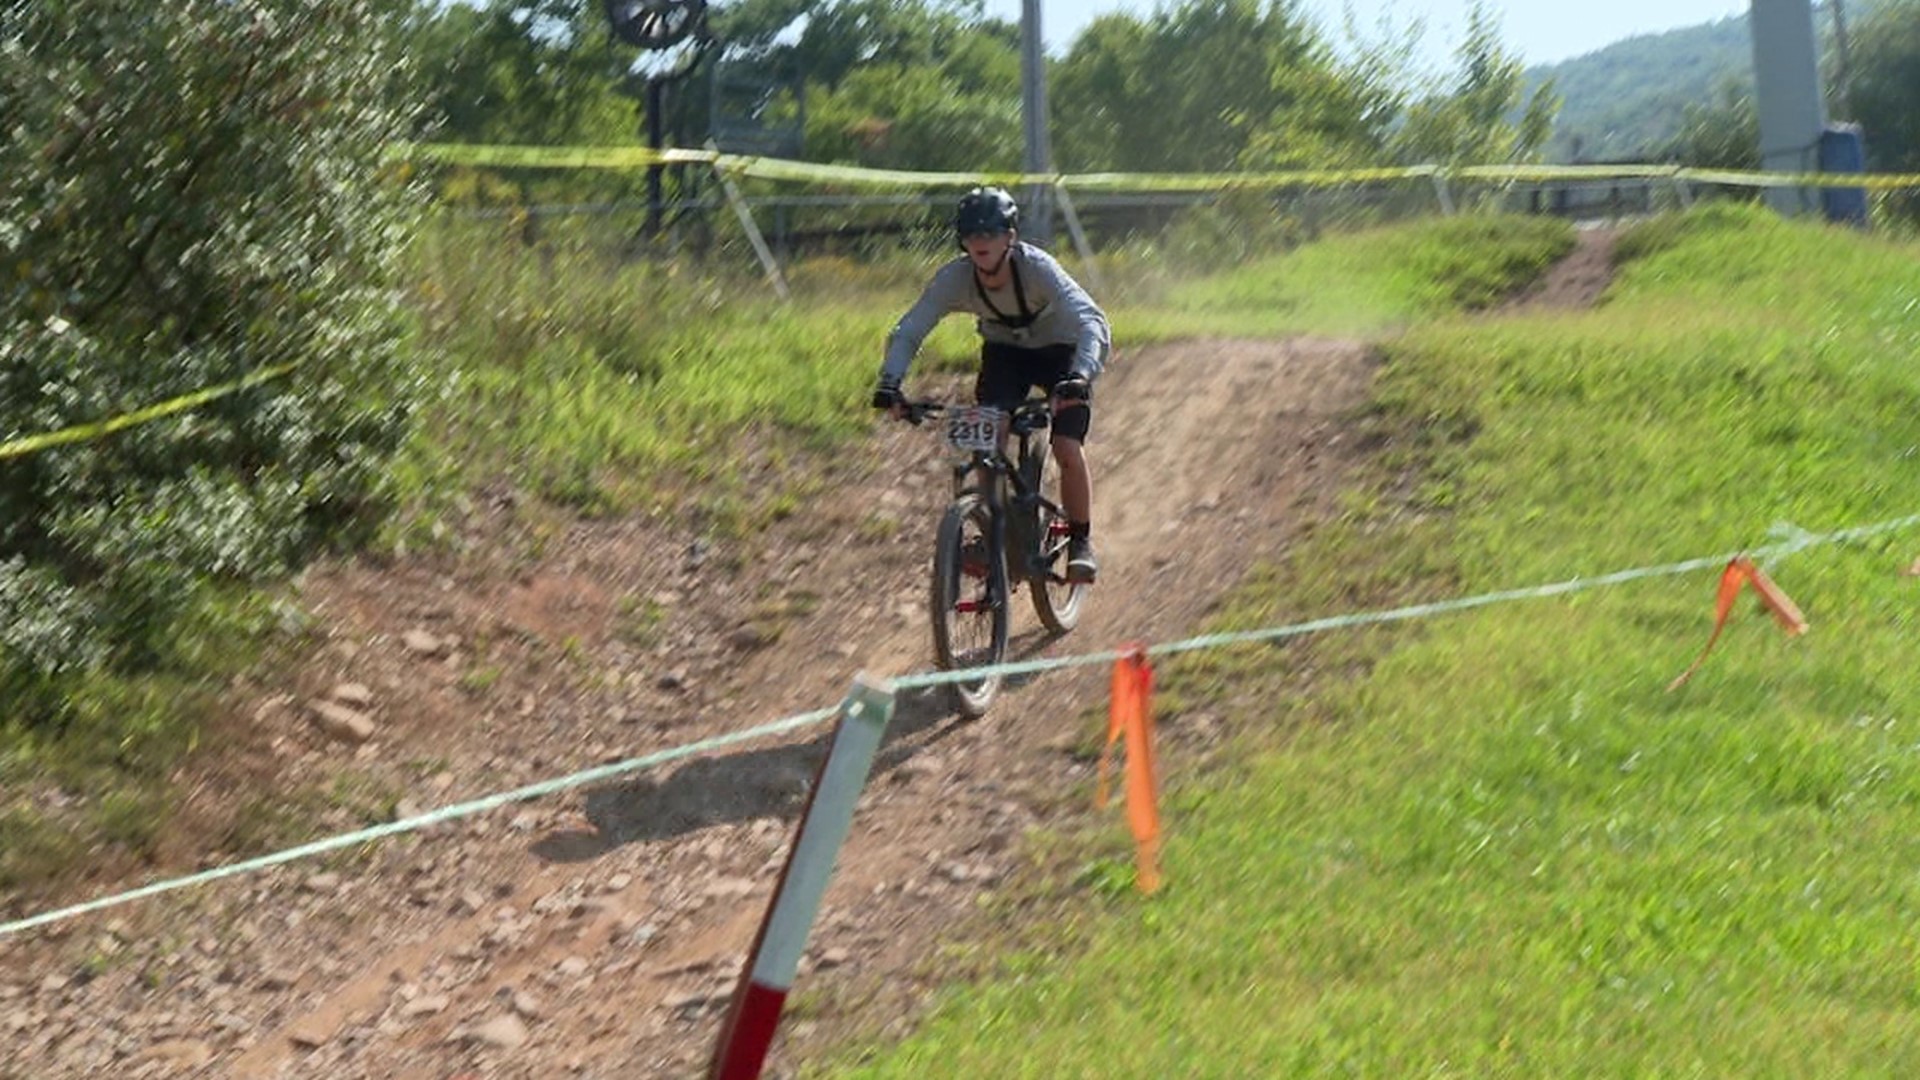 A ski resort in Carbon County played host to a massive mountain bike racing competition Sunday.